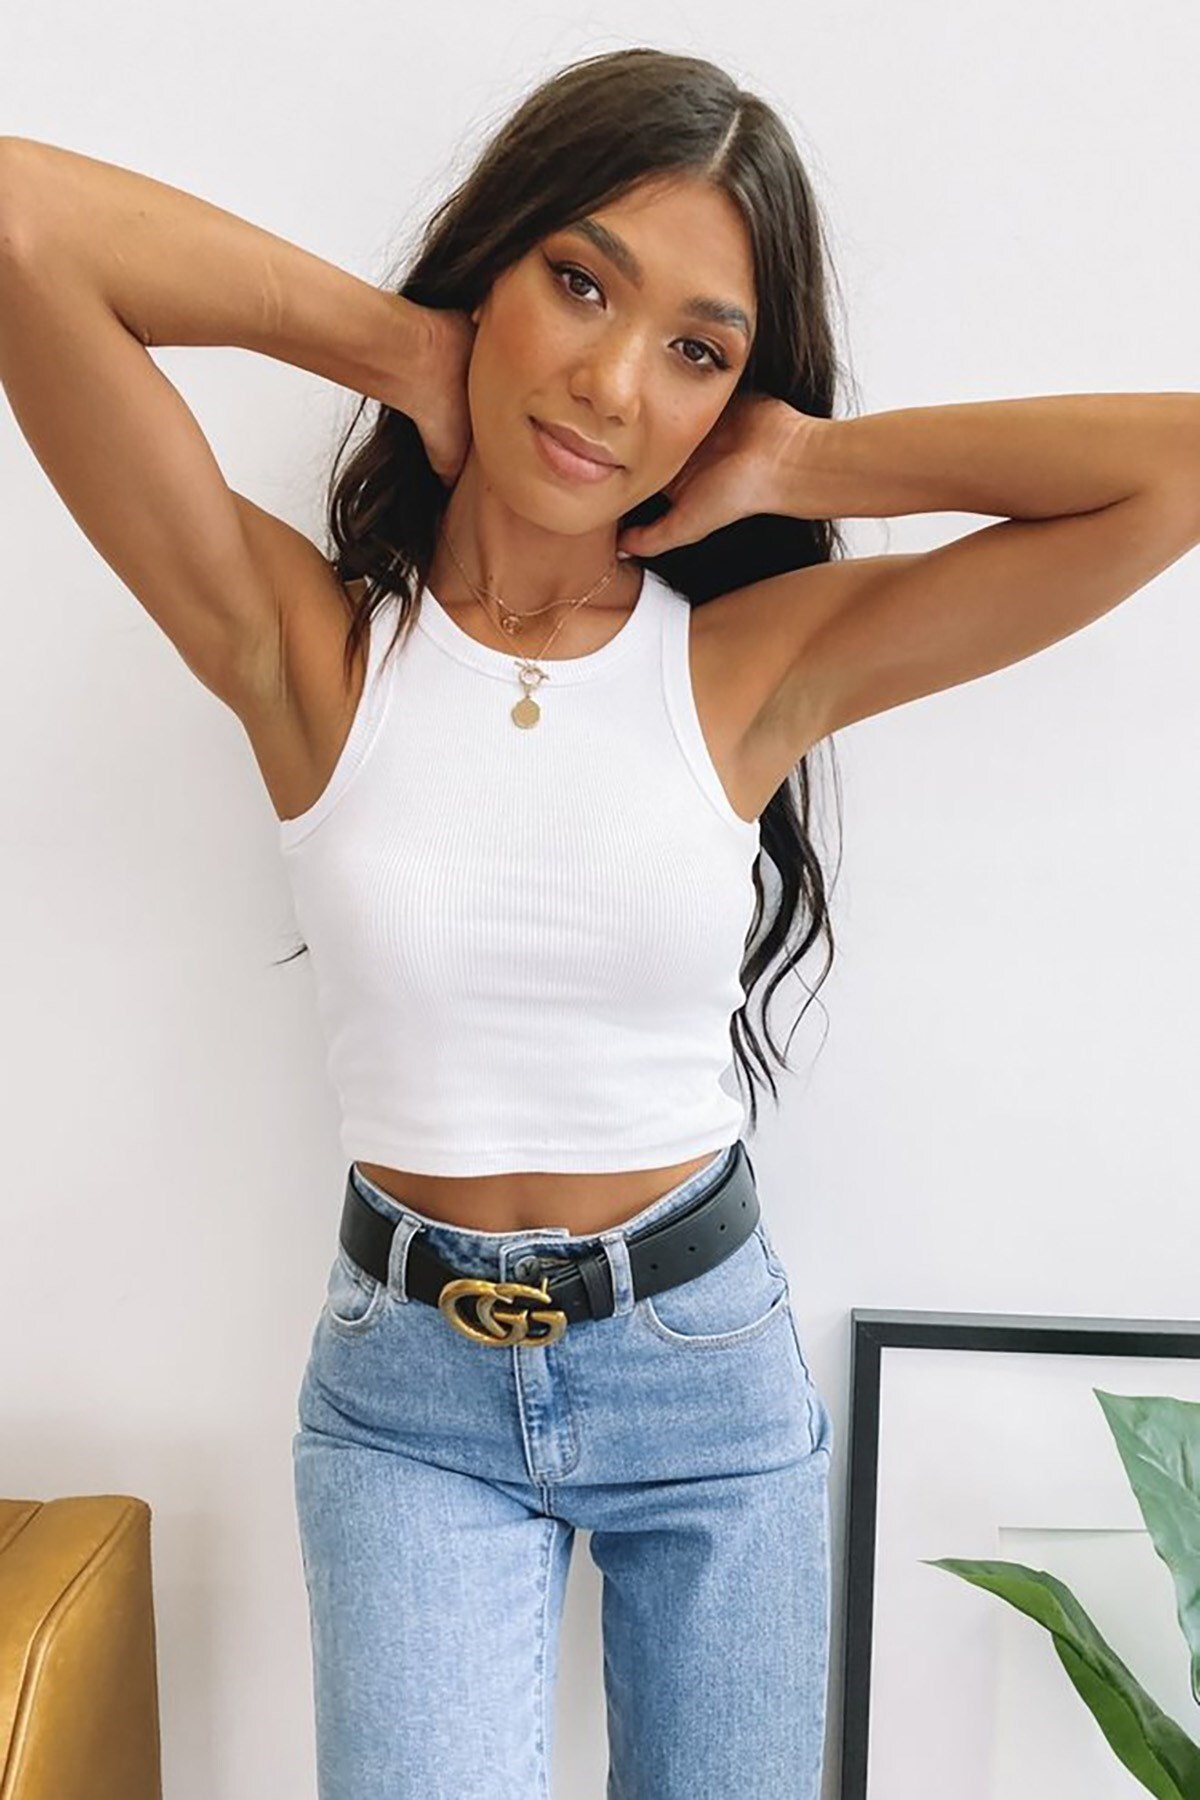 Madmext Mad Girls White Crop Top Mg975